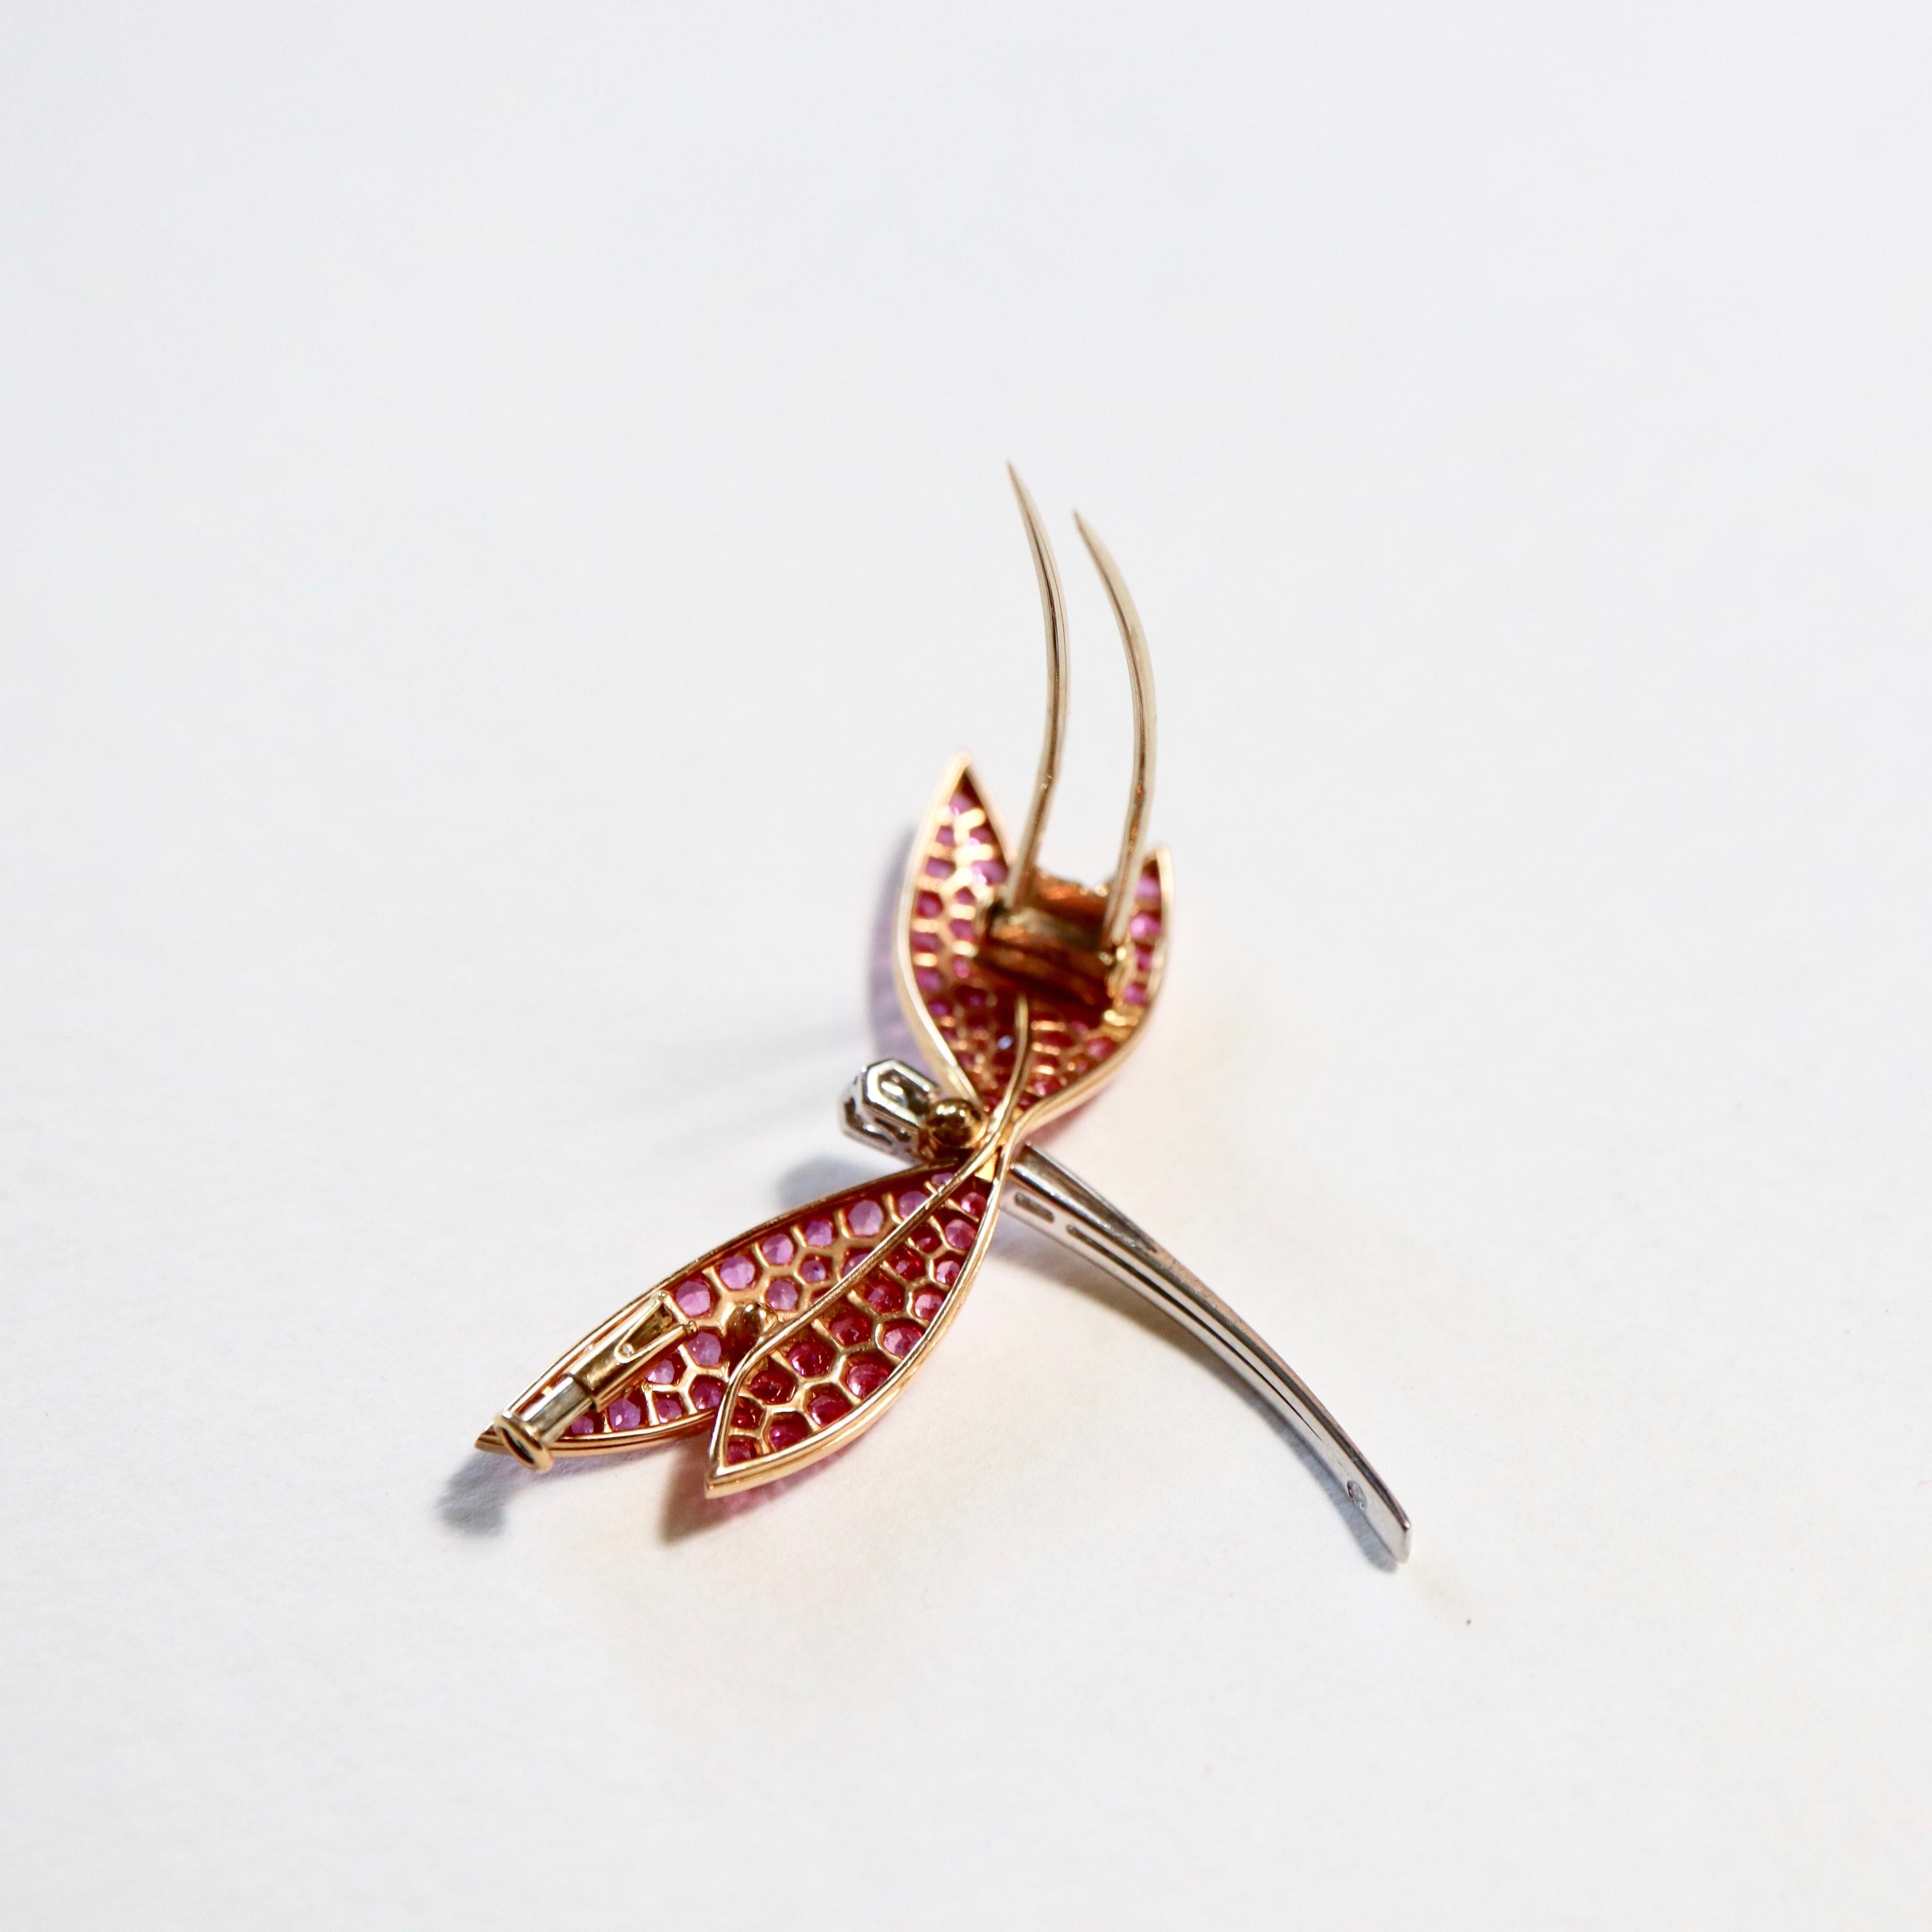 Brilliant Cut Van Cleef & Arpels Gold Dragonfly Brooch, Pink Sapphires Diamonds For Sale